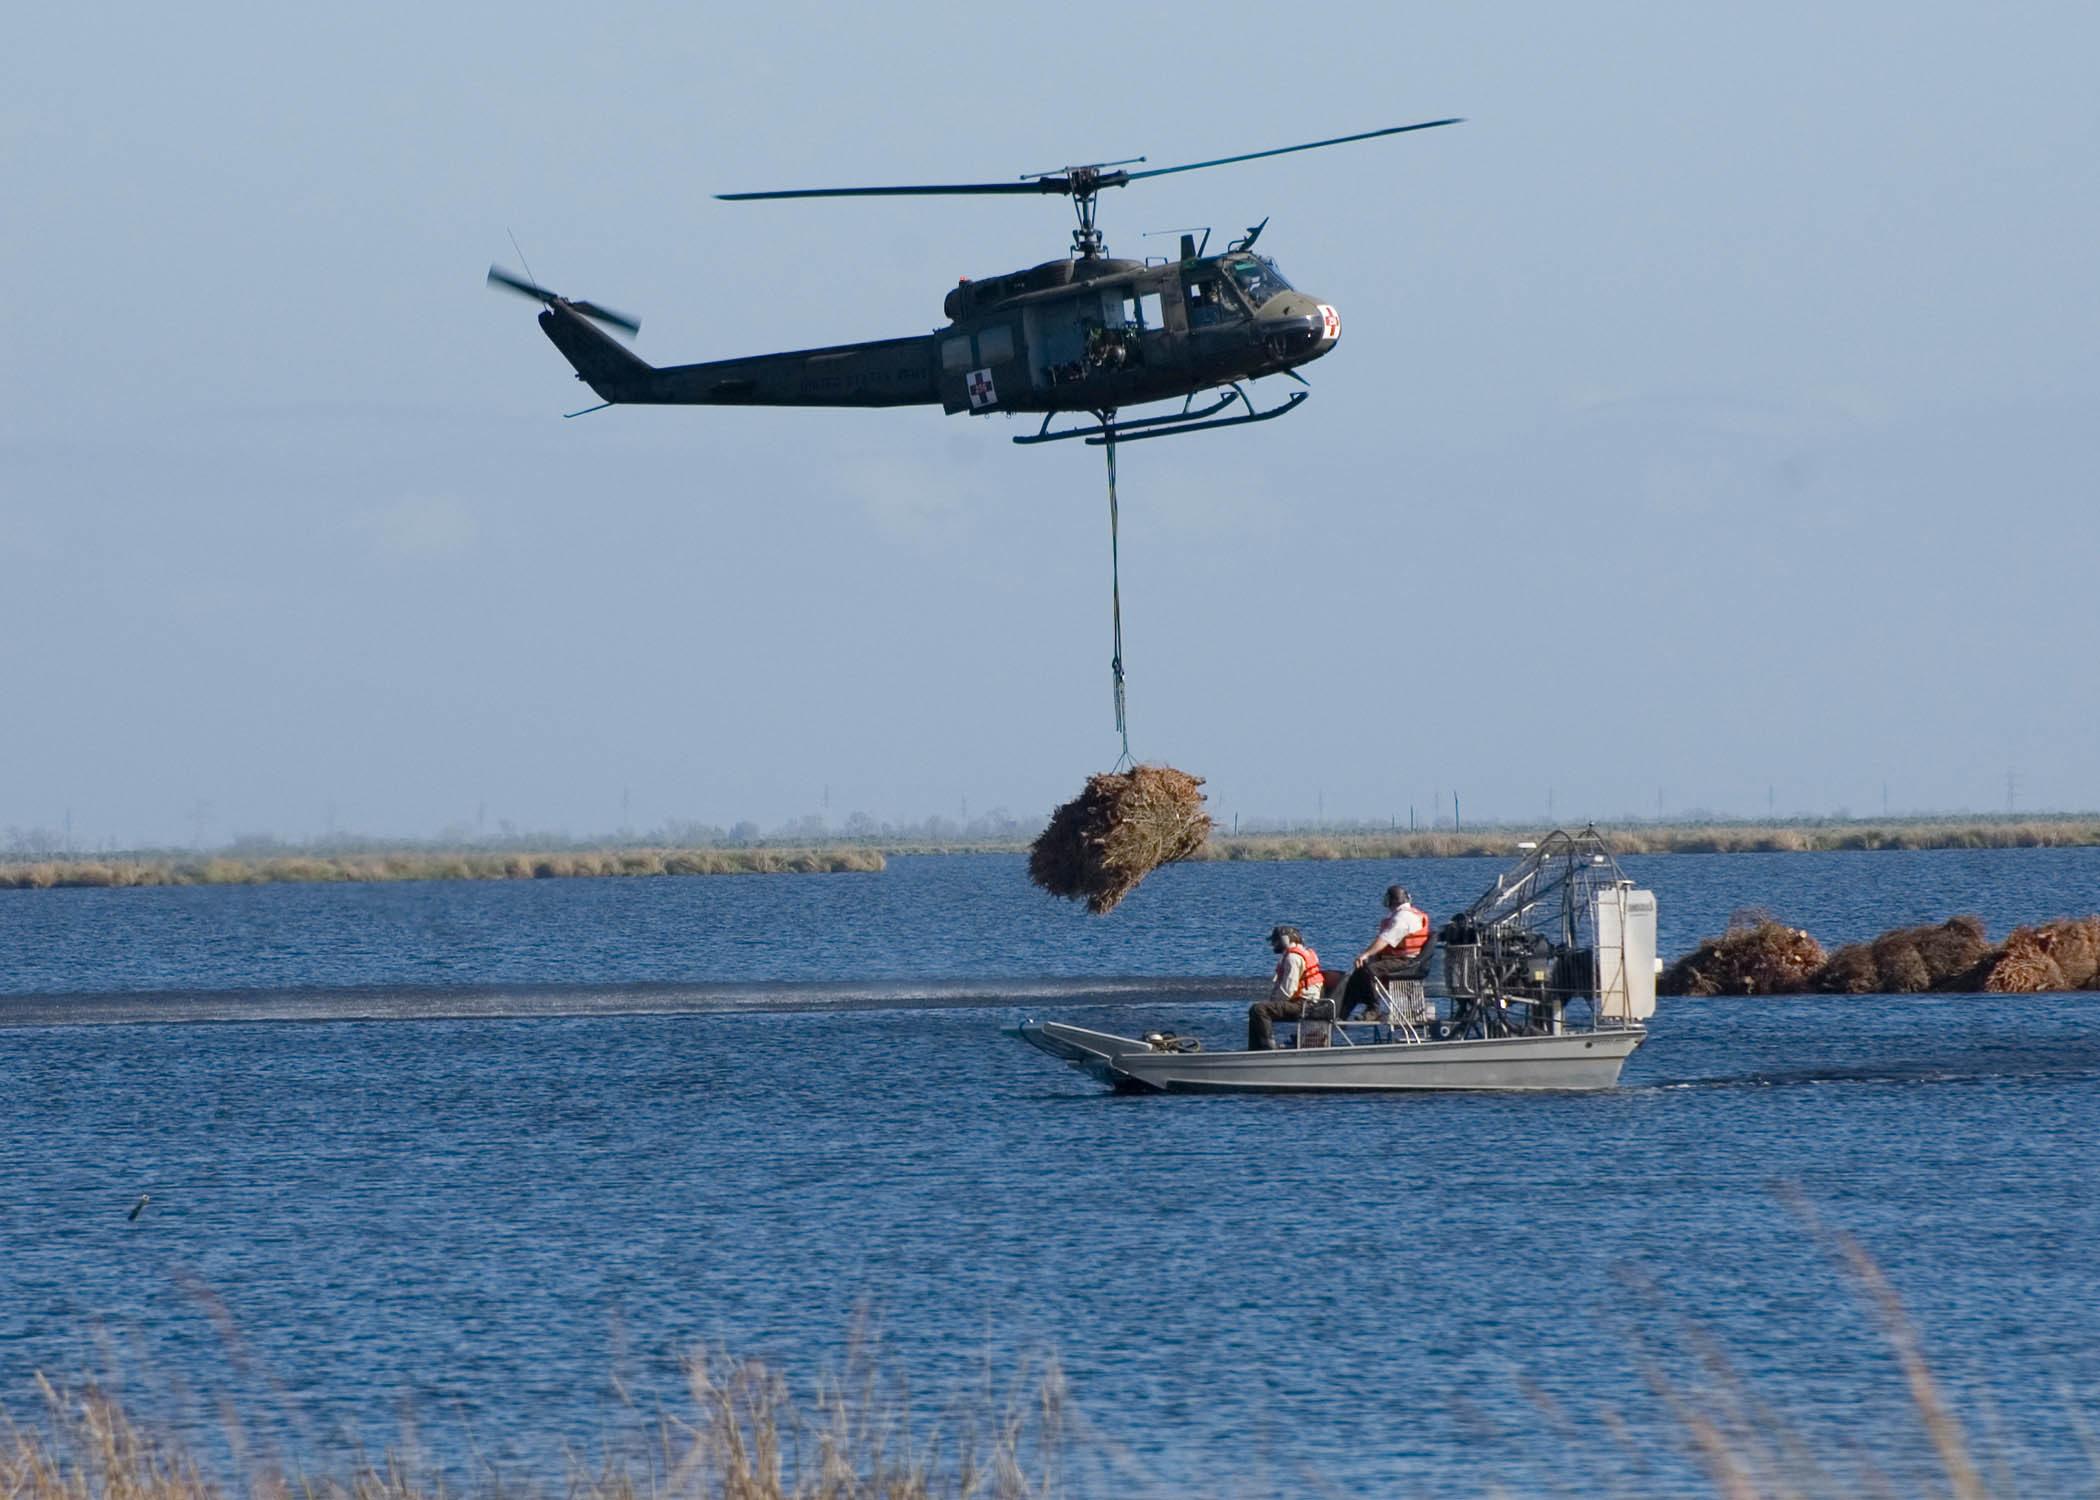 Helicopter drops bundle of trees into open water as an airboat stands by to help